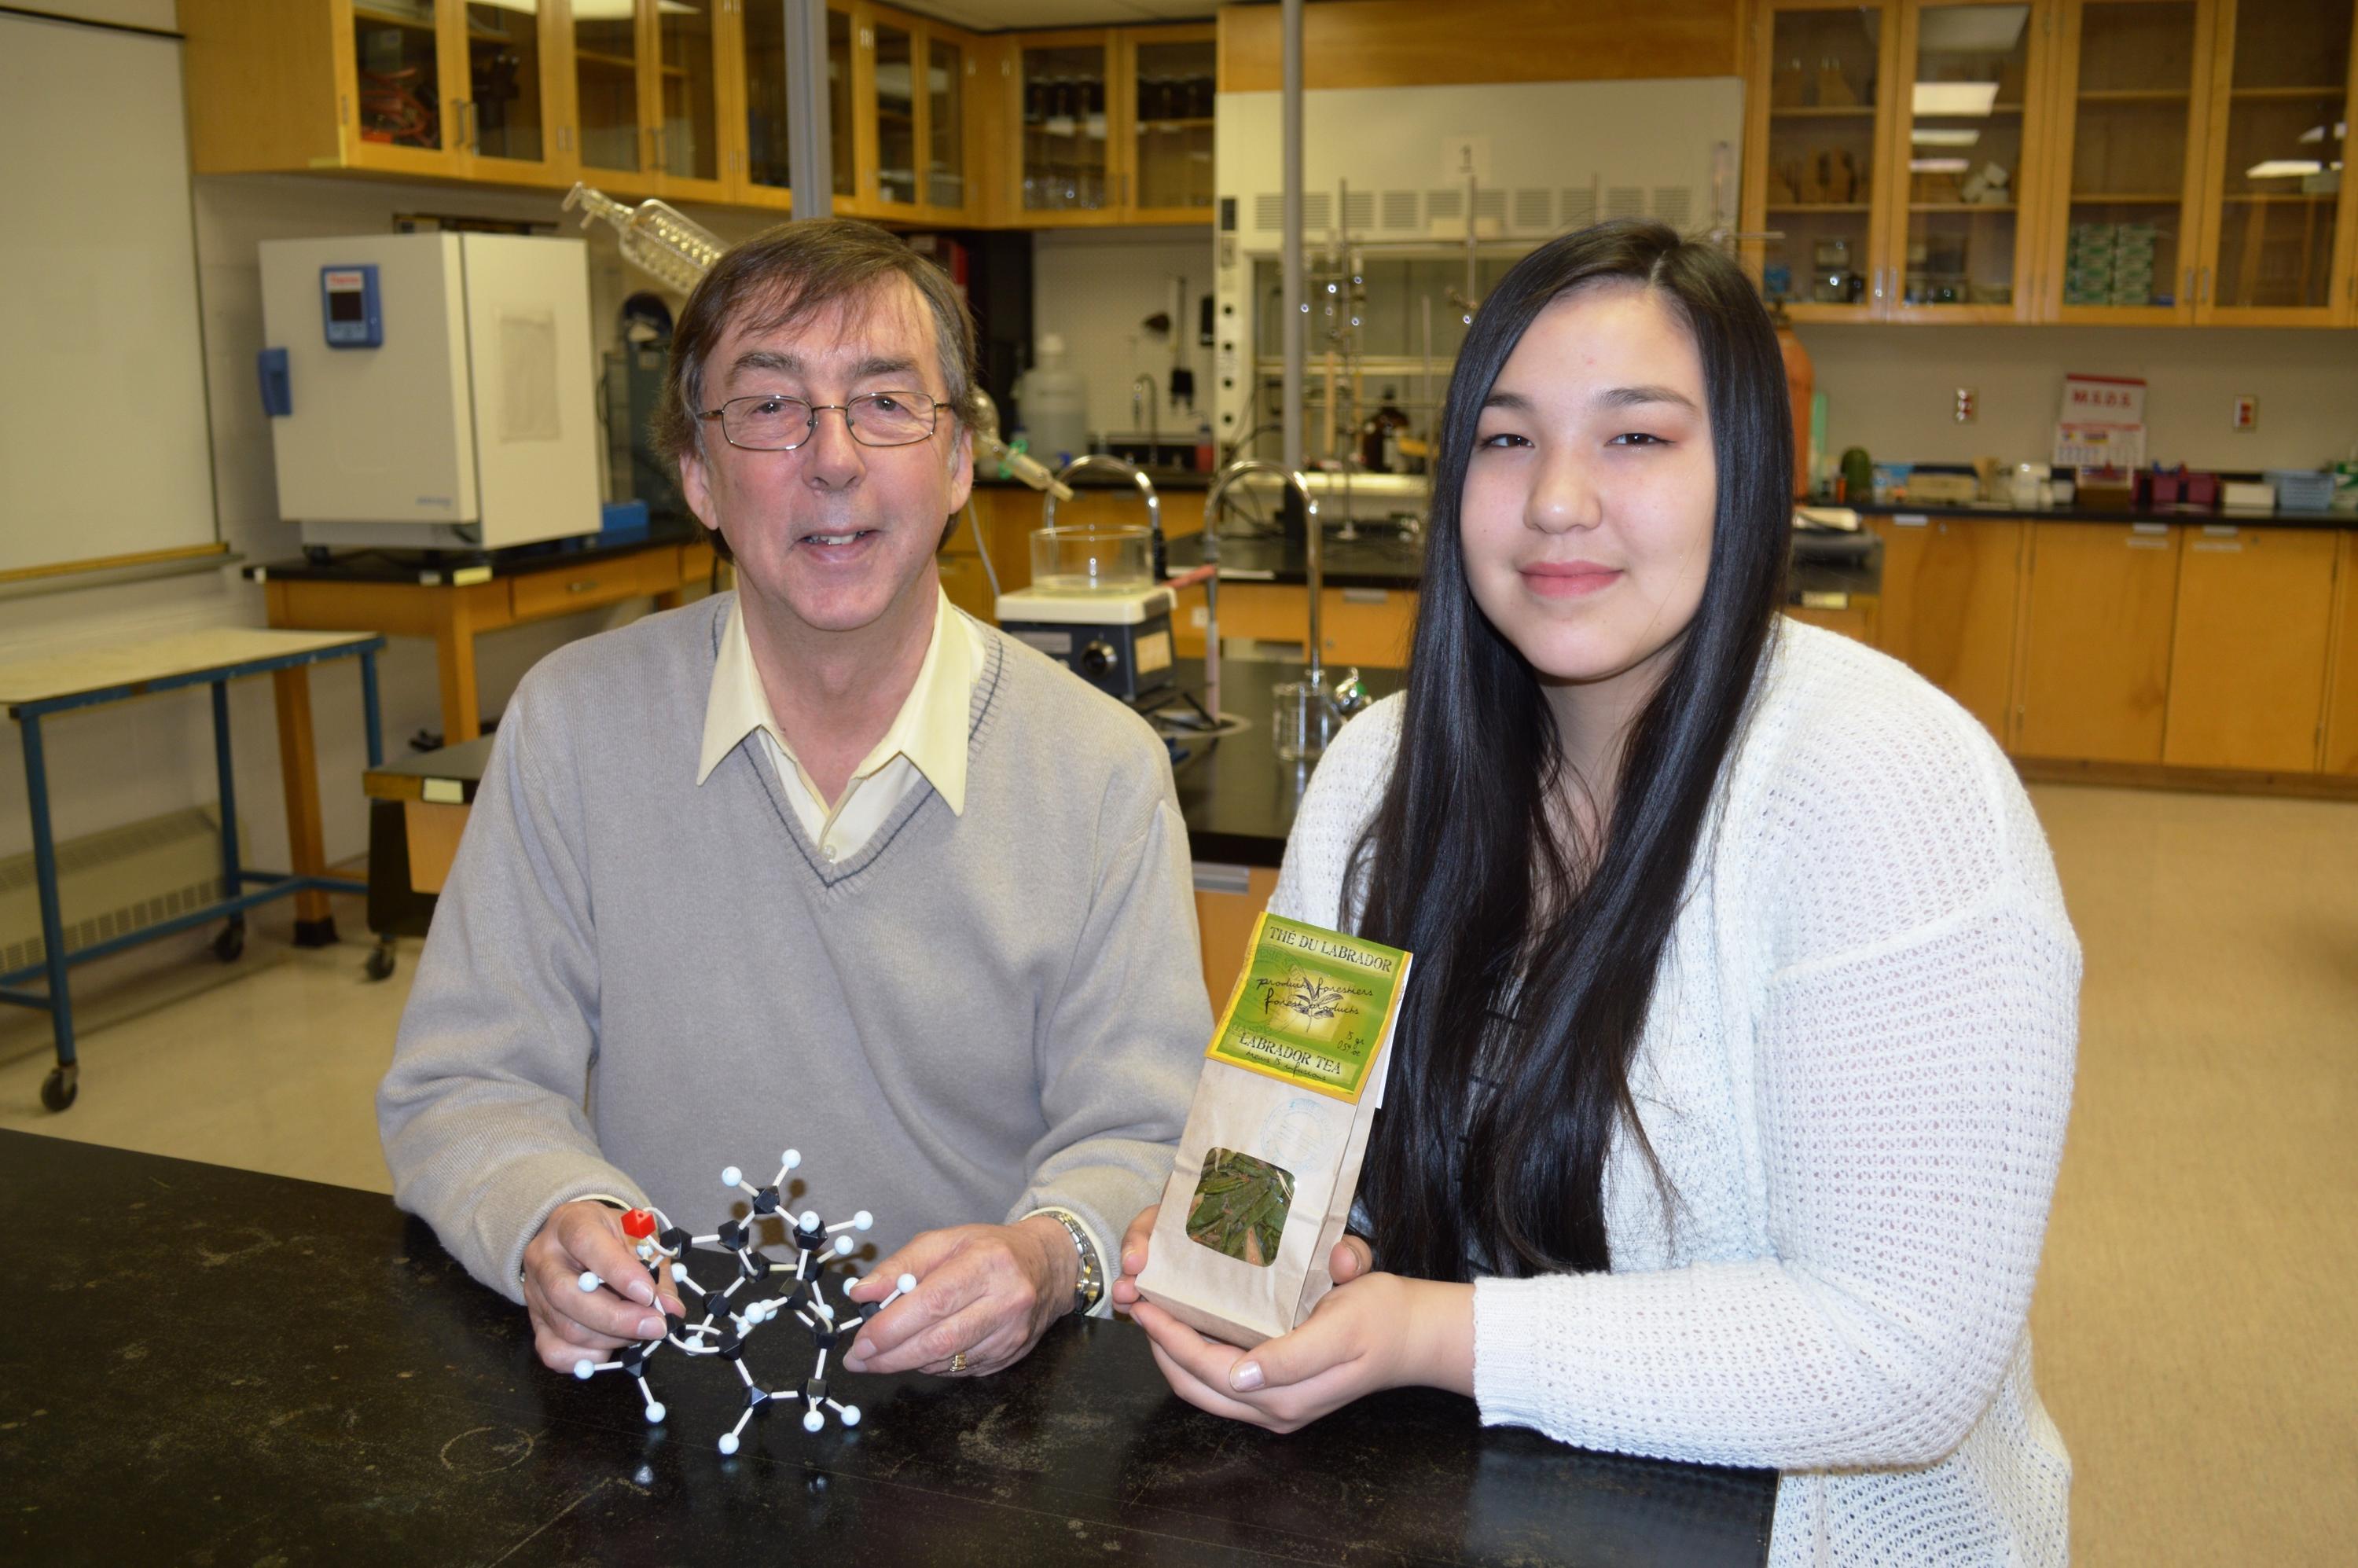 Geoff Rayner-Canham holid a ball-and-stick model of the active constituent, germacrone and Chaim Christiana Andersen is holding a pack of Labrador tea